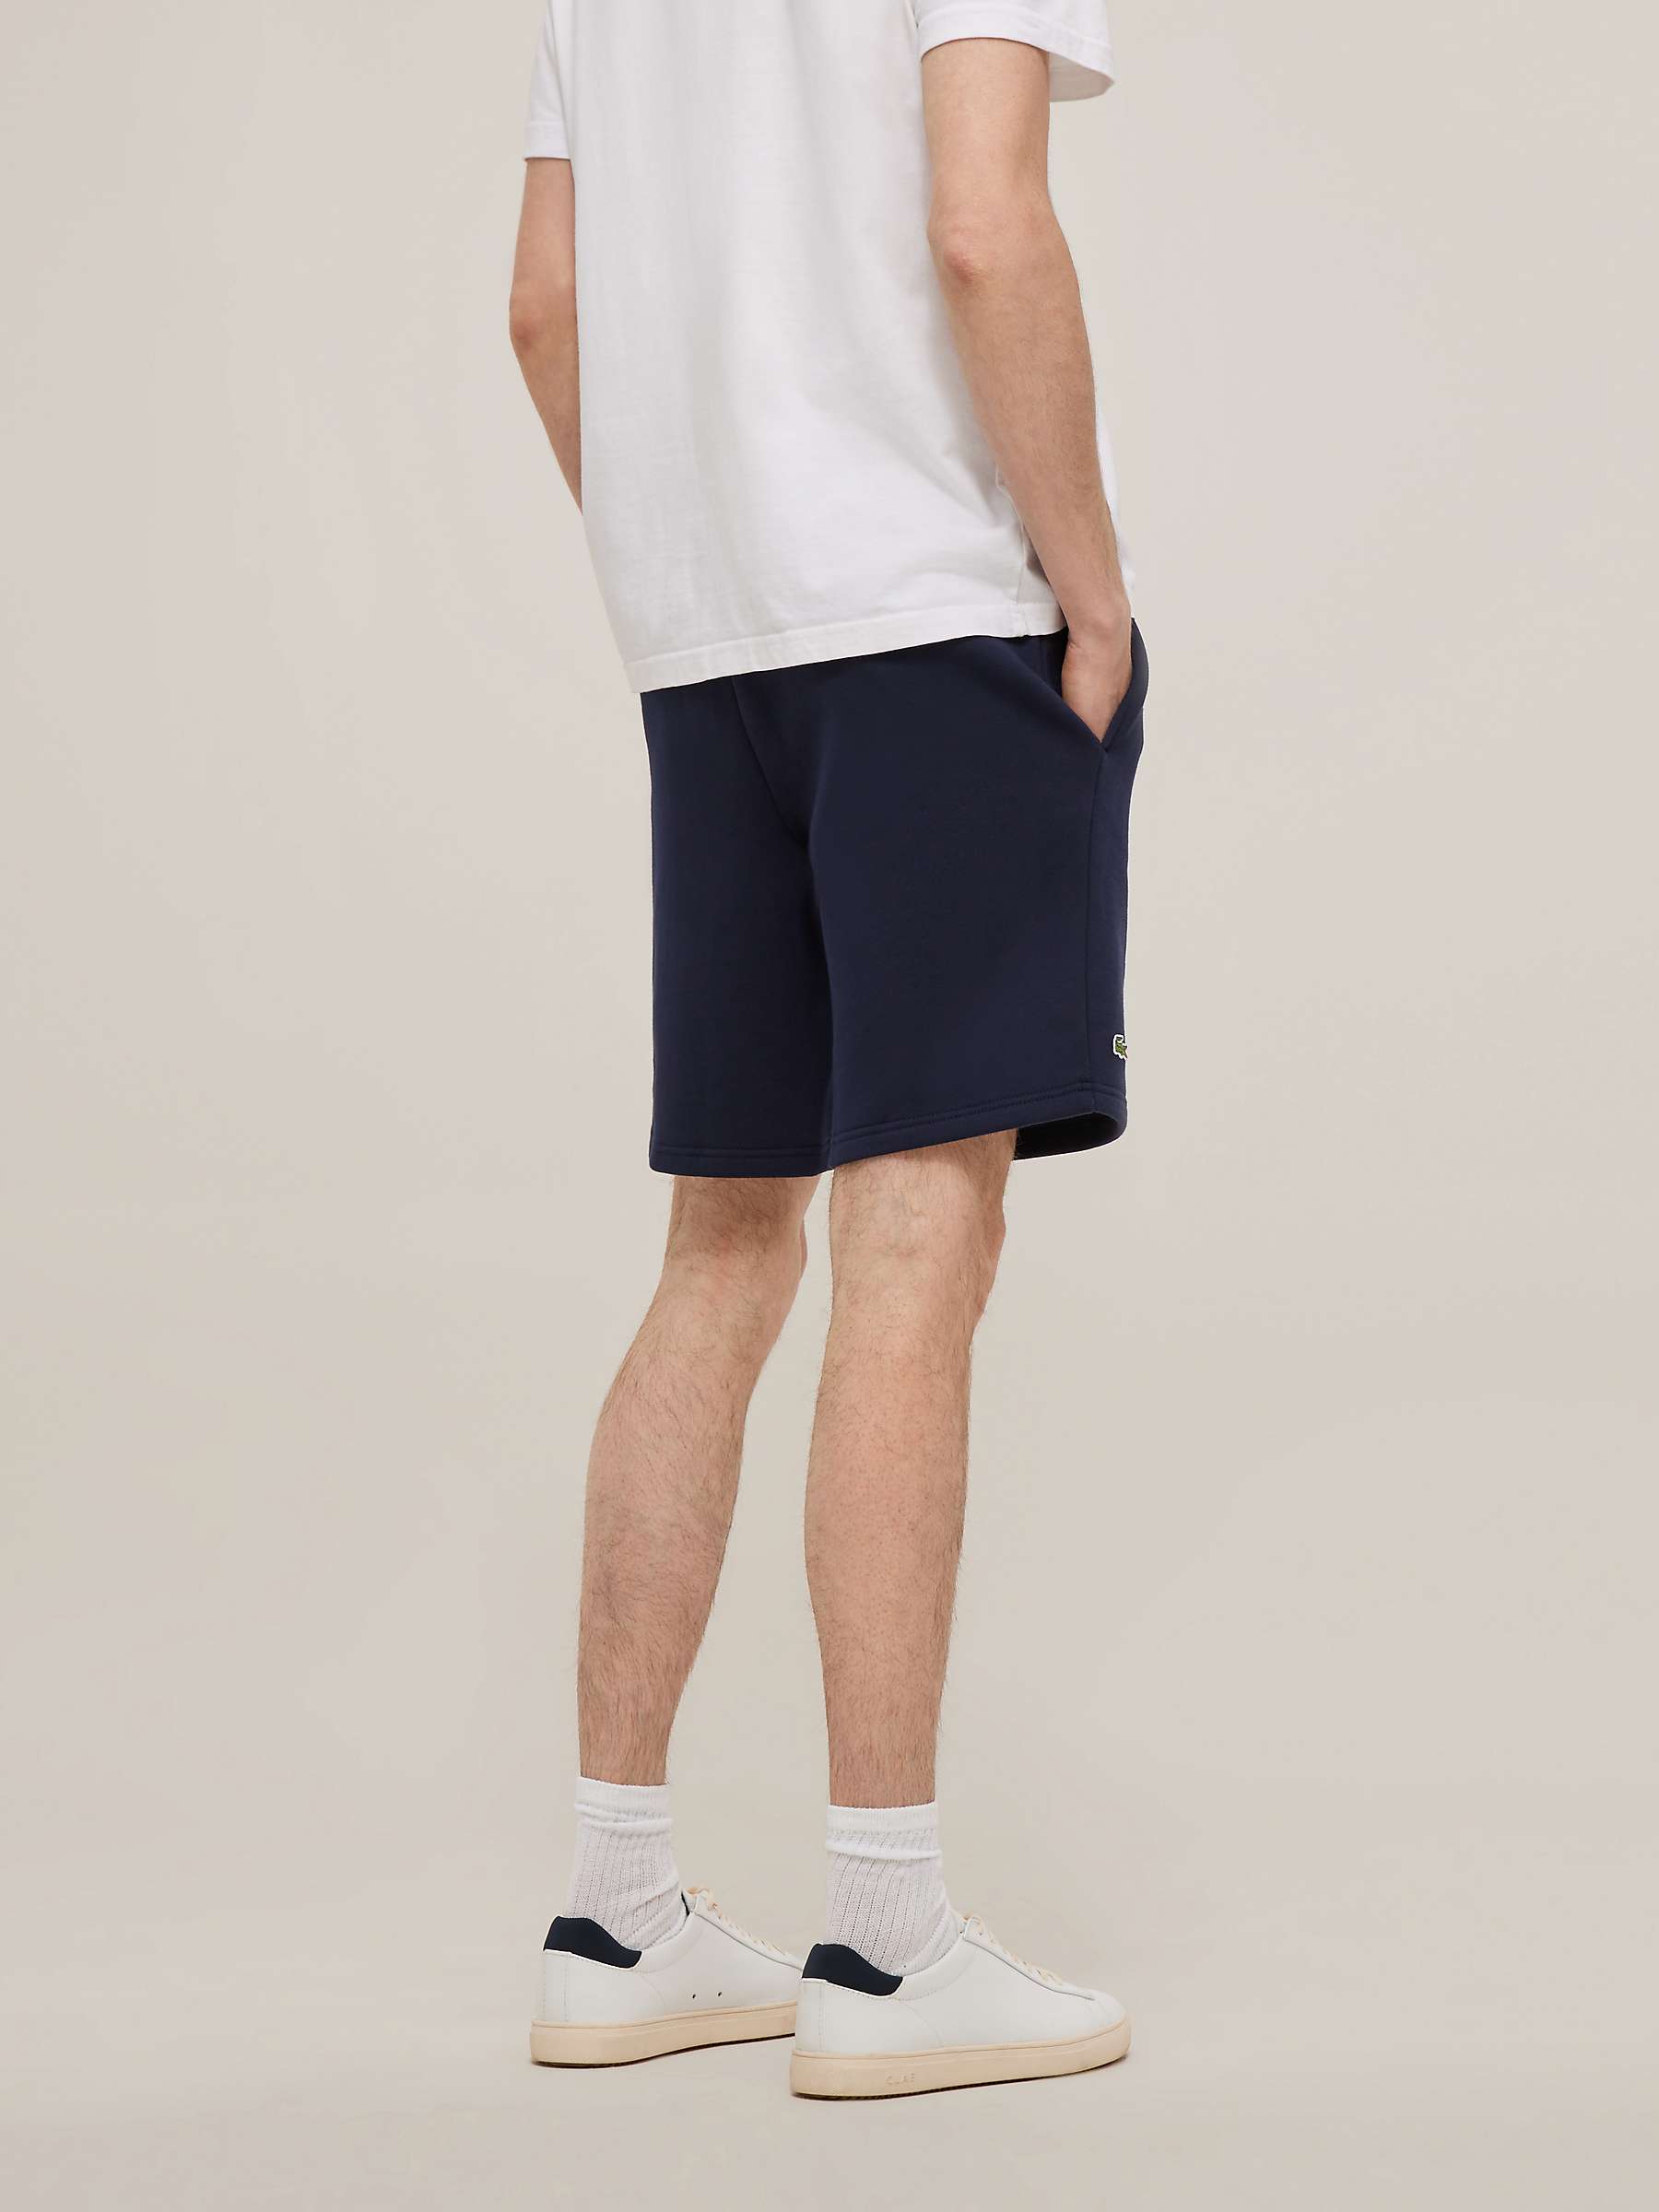 Buy Lacoste Classic Logo Jogger Sweat Shorts Online at johnlewis.com